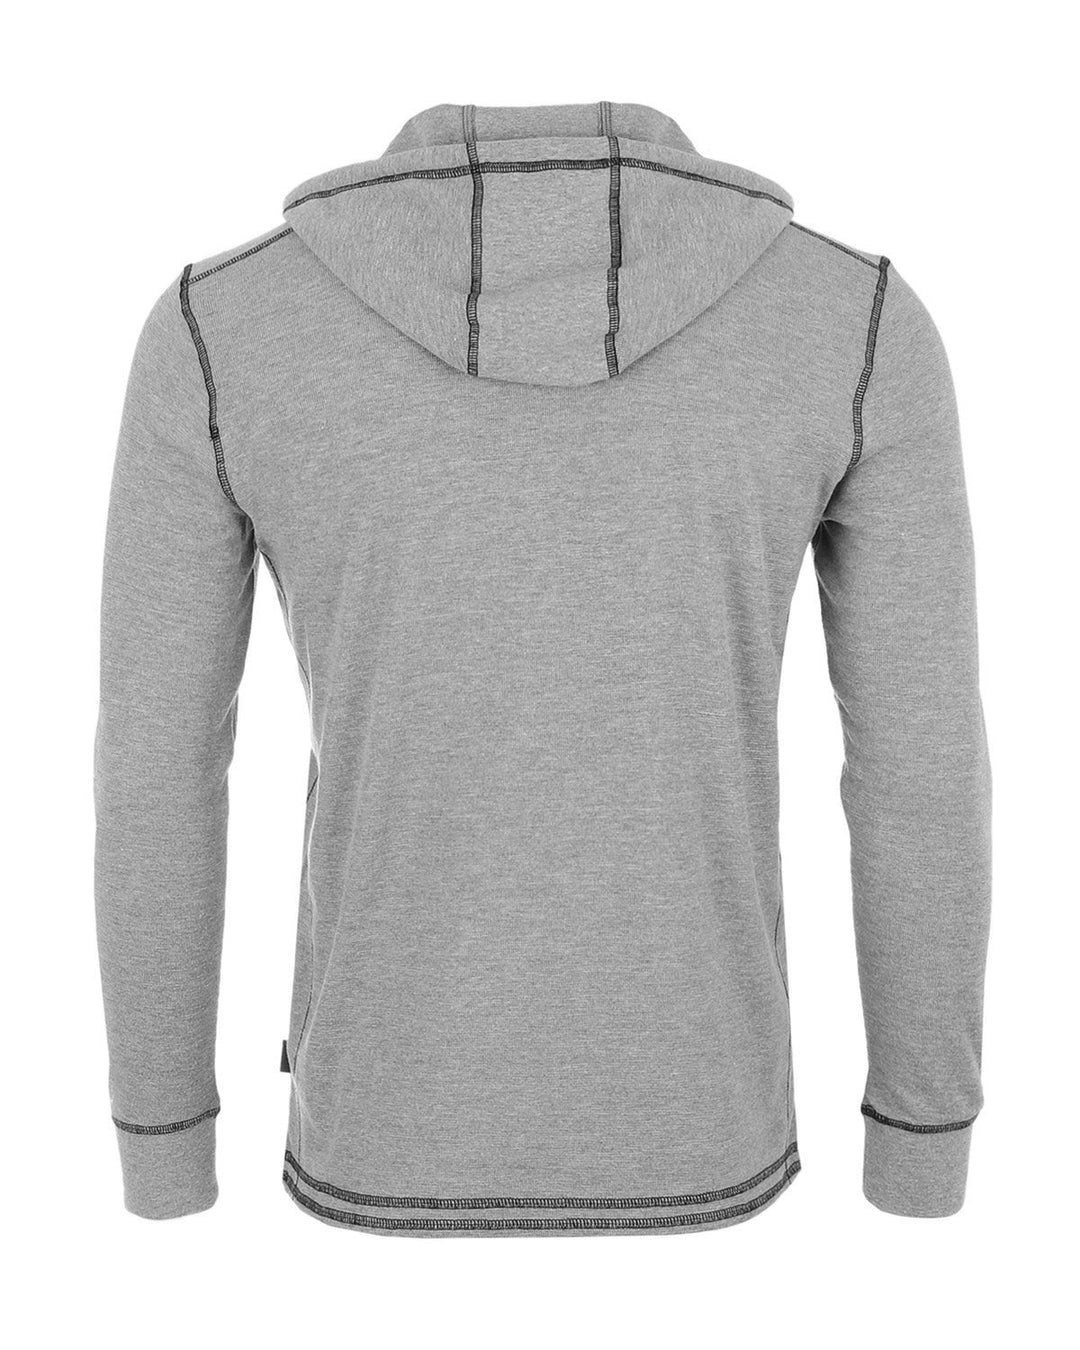 Heather Grey Men's Thermal Long Sleeve Lightweight Fashion Hooded Henley